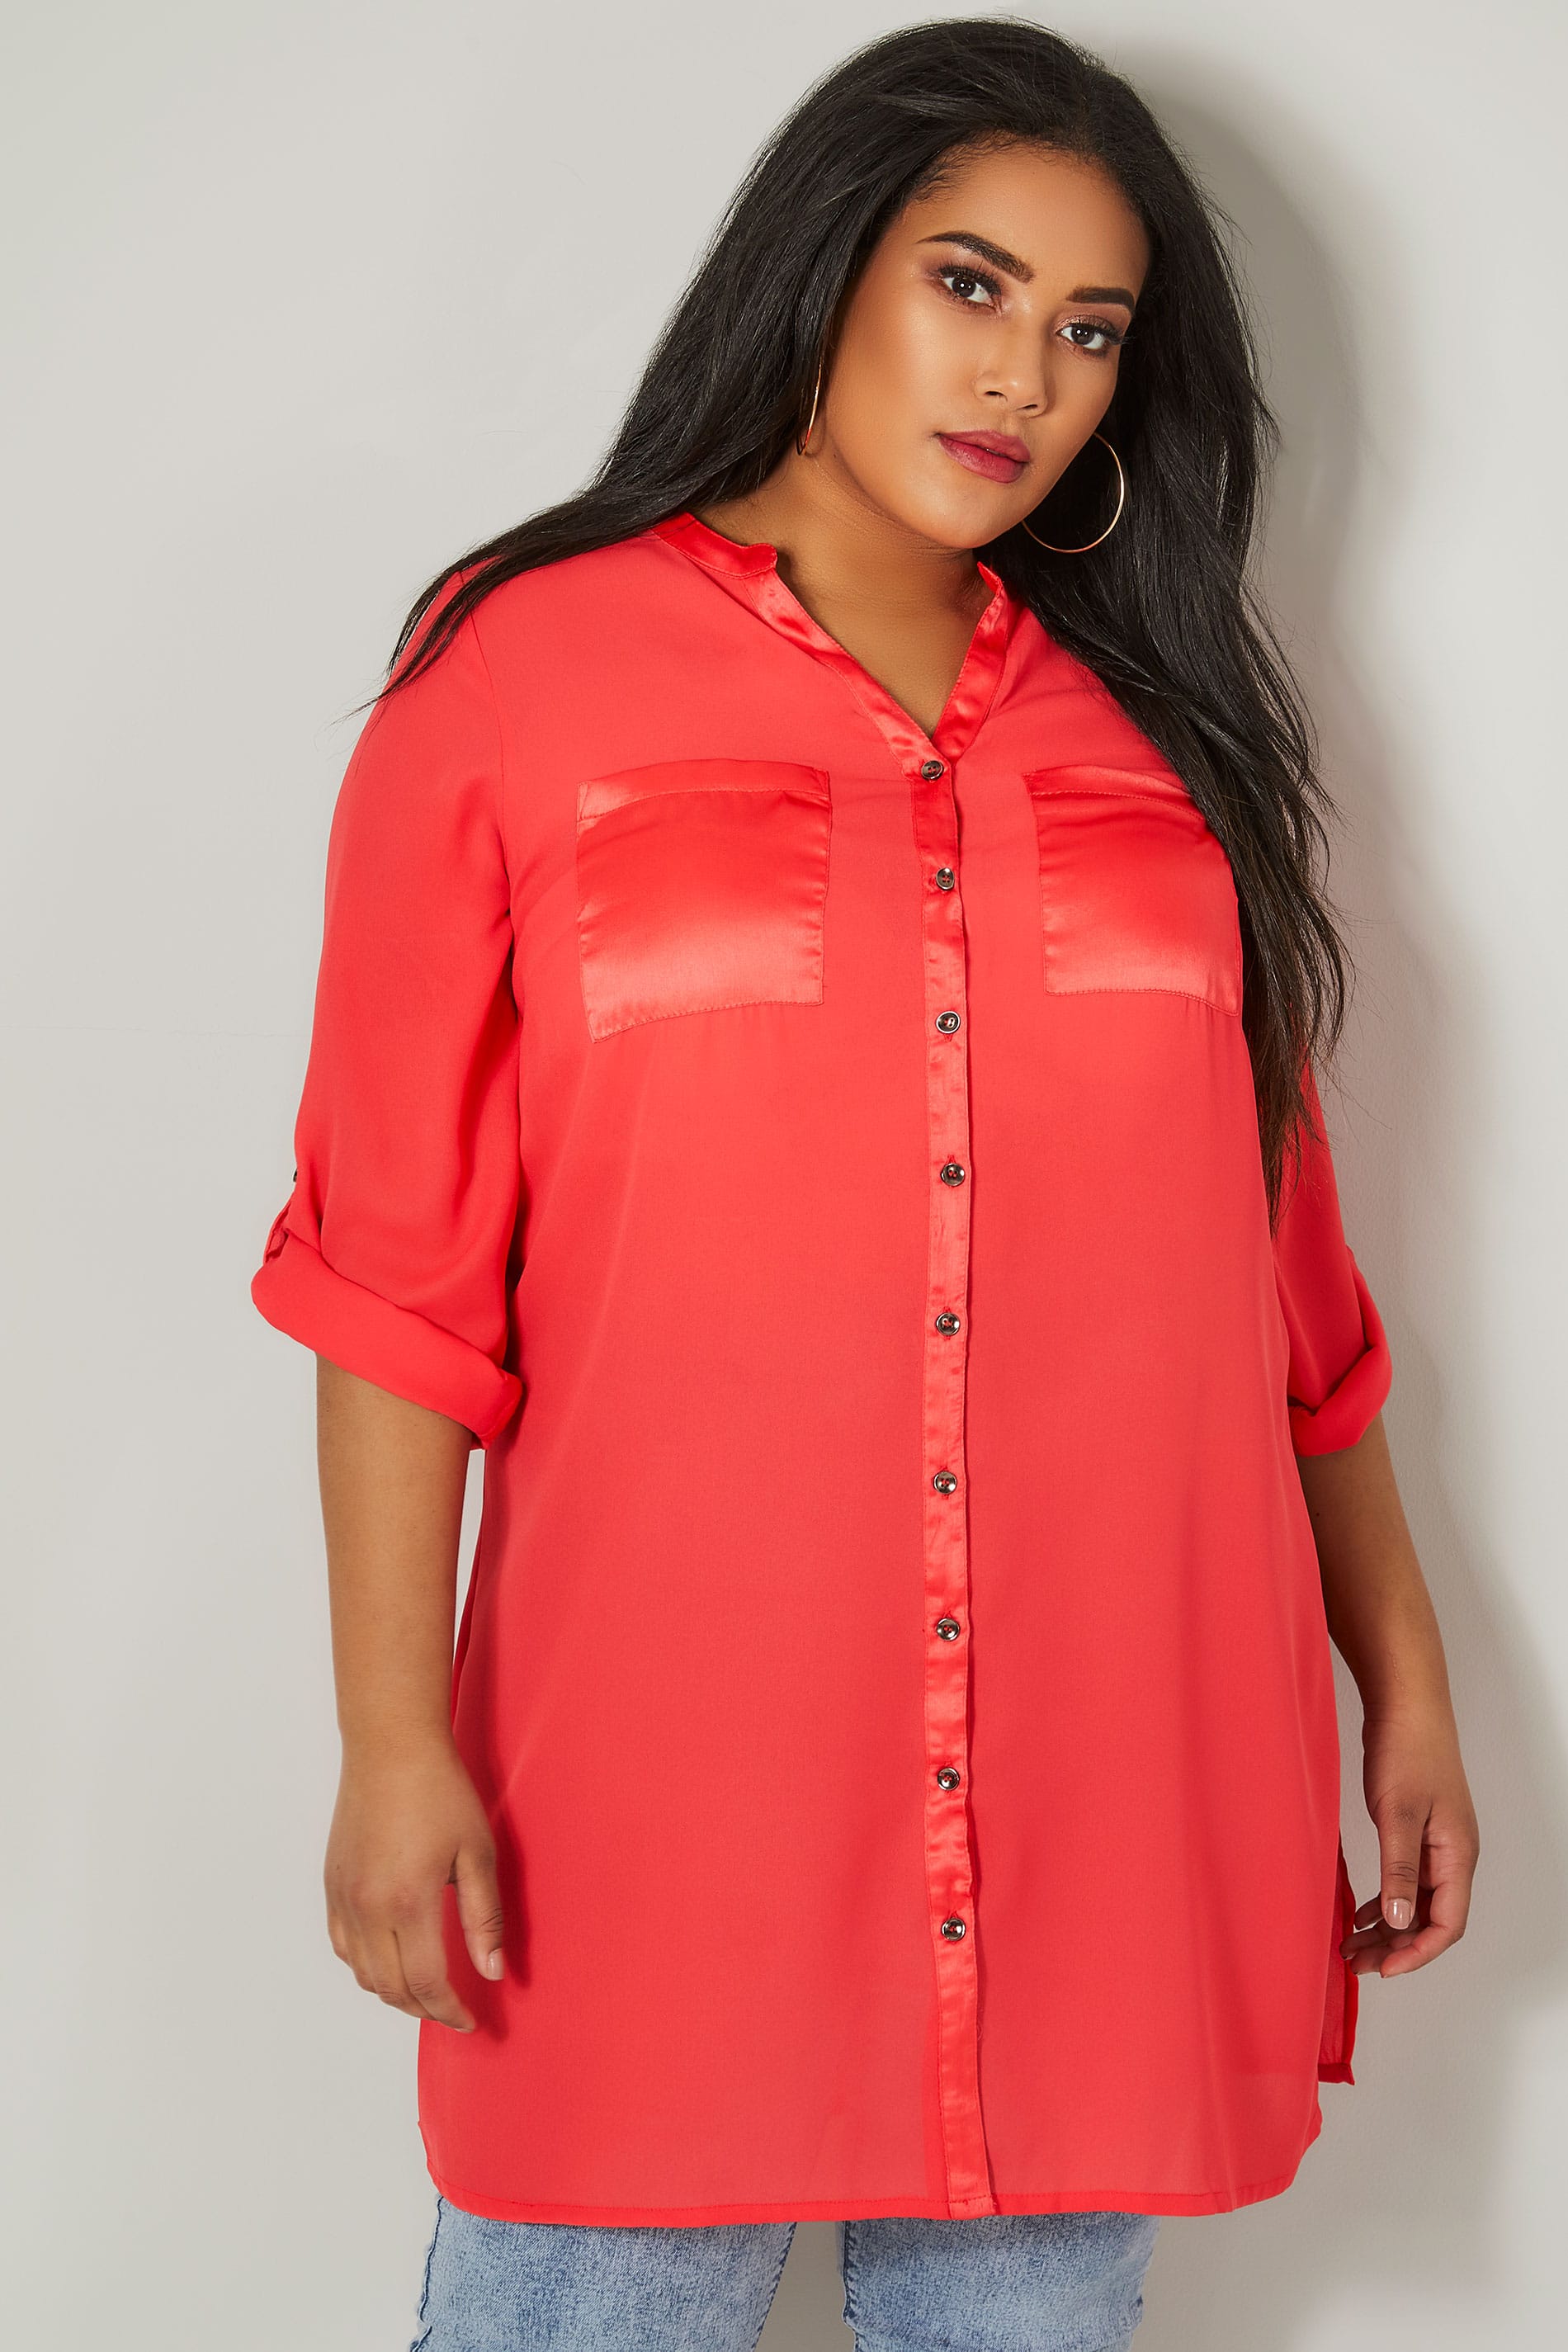 YOURS LONDON Coral Chiffon Blouse With Satin Trim, plus 